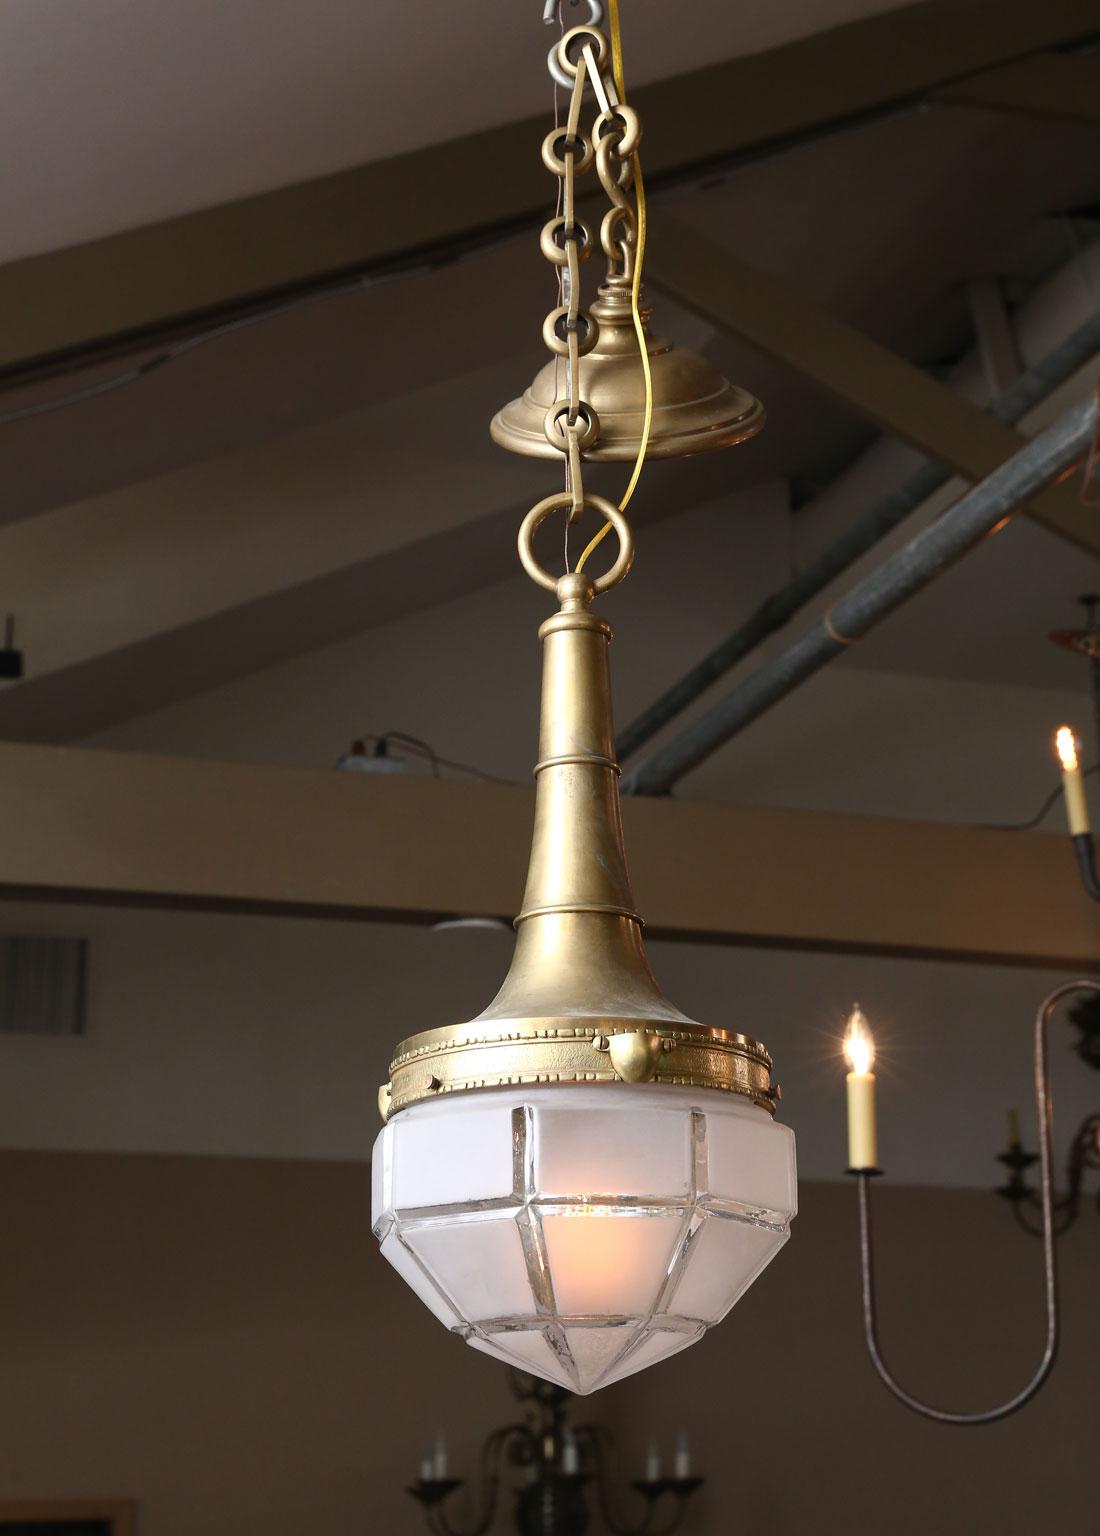 Beautifully cast solid brass and hand blown frosted glass pendant. From France, circa 1930. Art Deco style pendant. Re-wired for the US with UL parts. Very nice quality and a beautiful patina on the brass. Simple, elegant and timeless appeal. Height